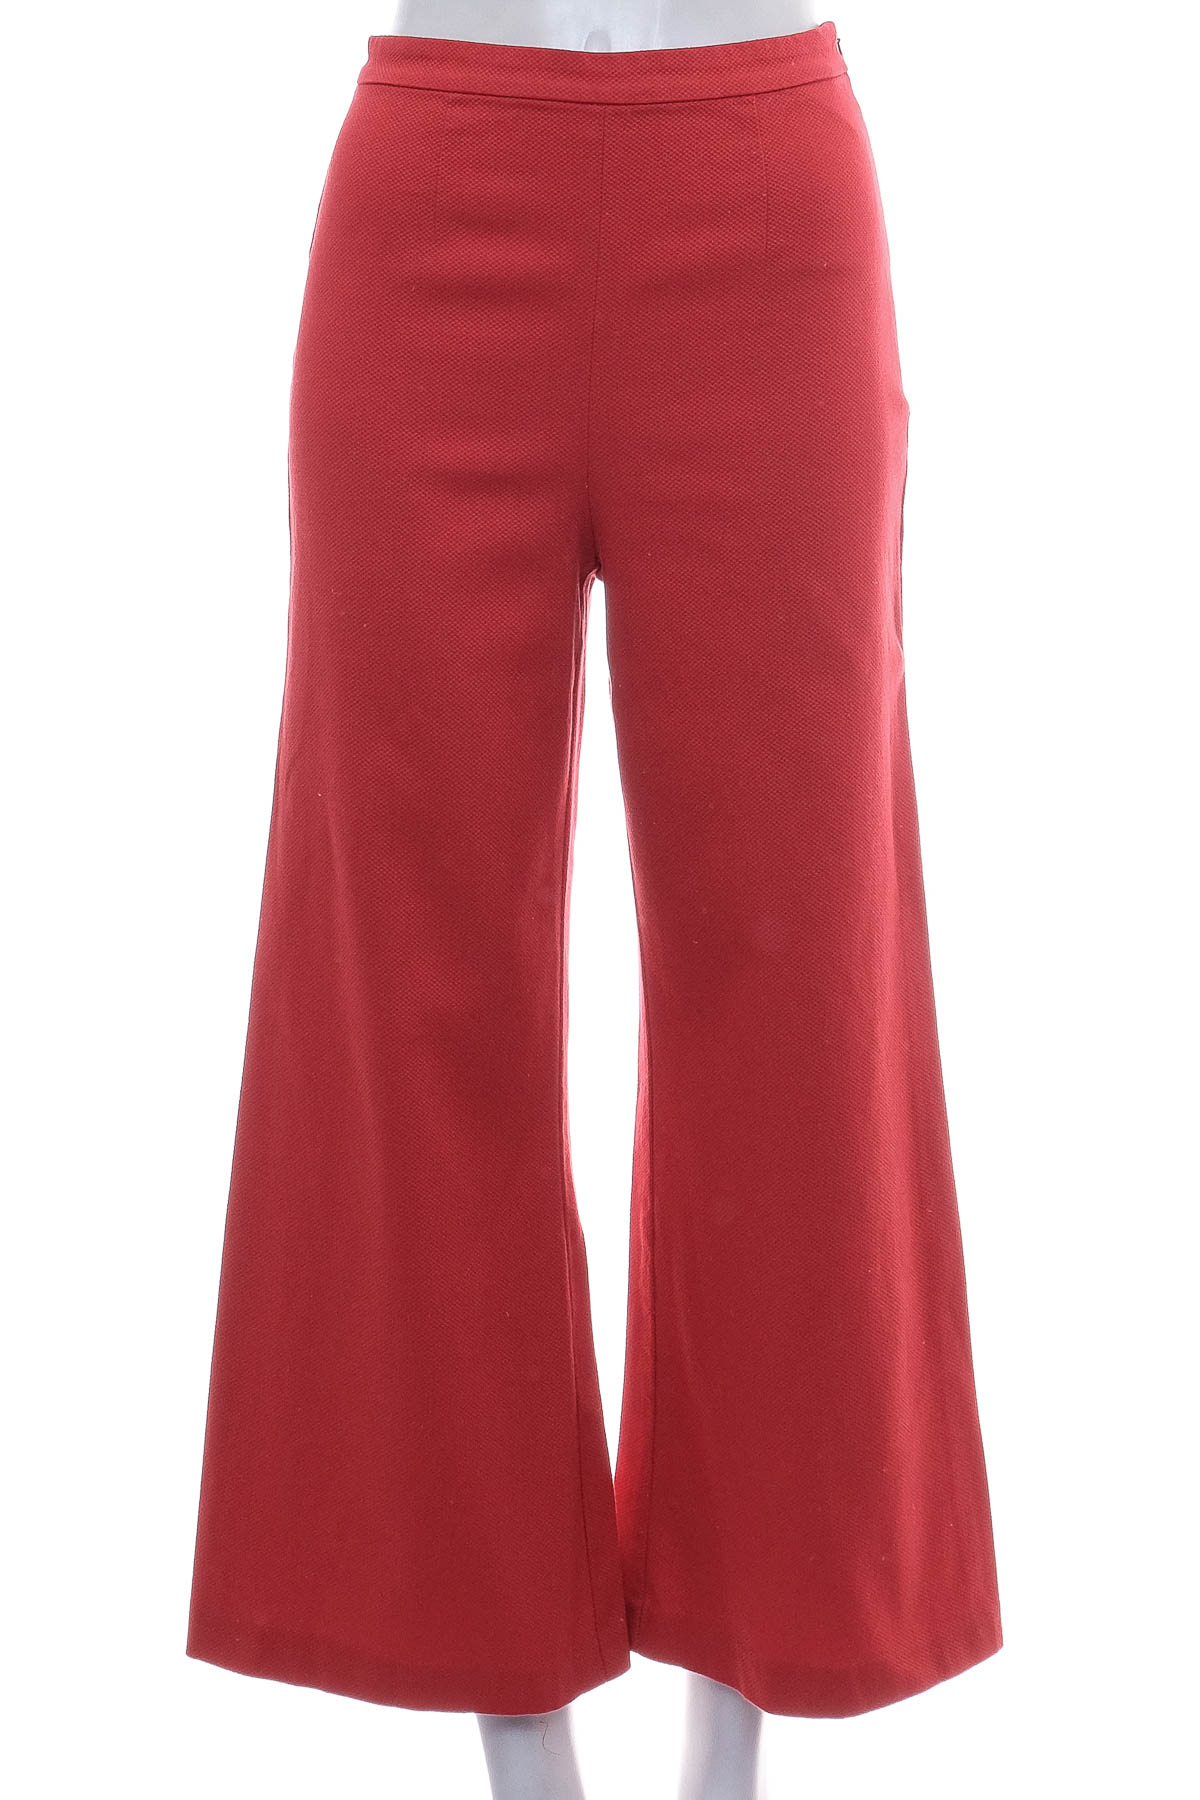 Women's trousers - Max&Co. - 0